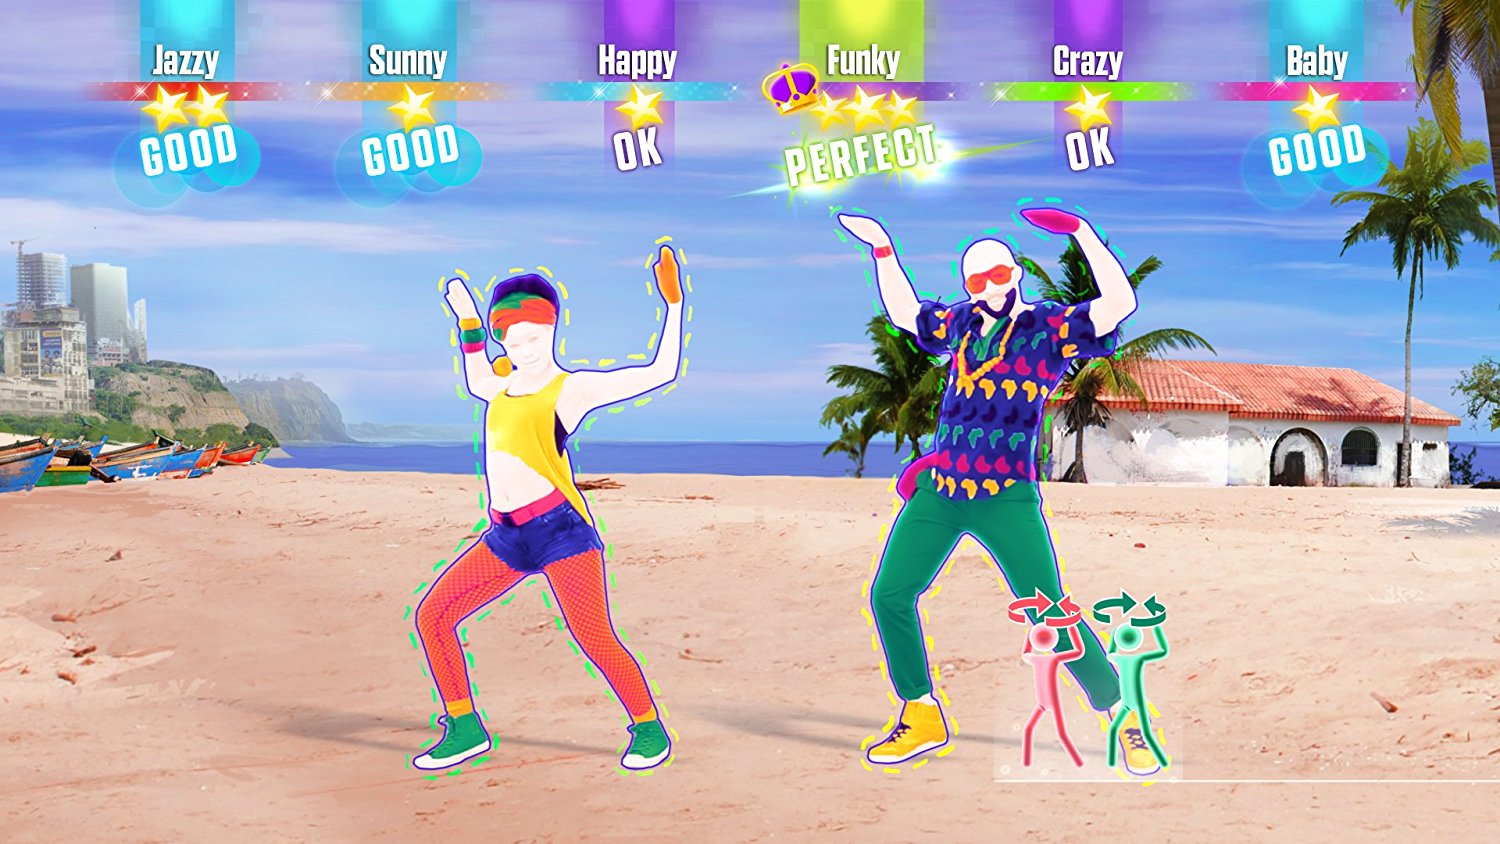 Just Dance 2016 - [PlayStation 4